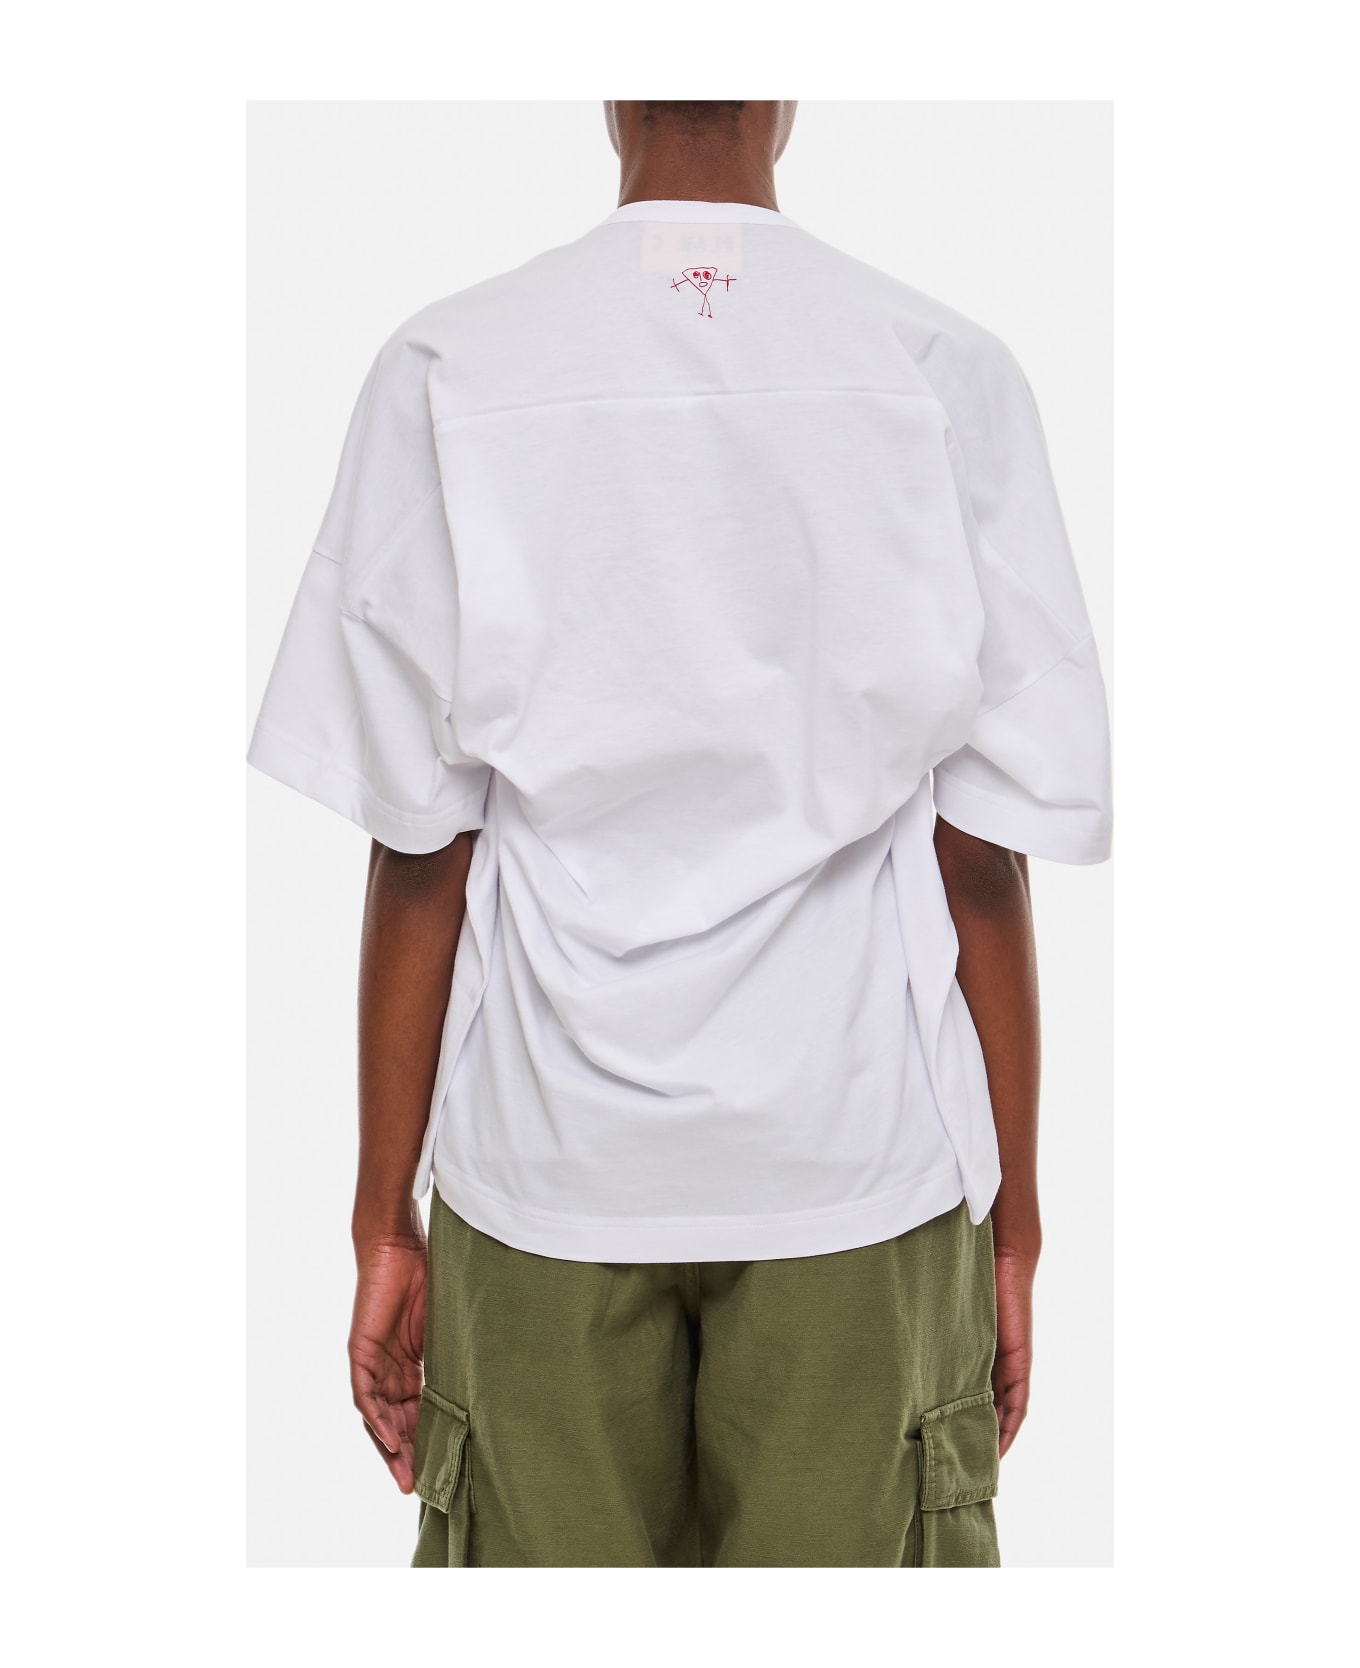 Plan C Relaxed Fit Jersey T-shirt - White Tシャツ